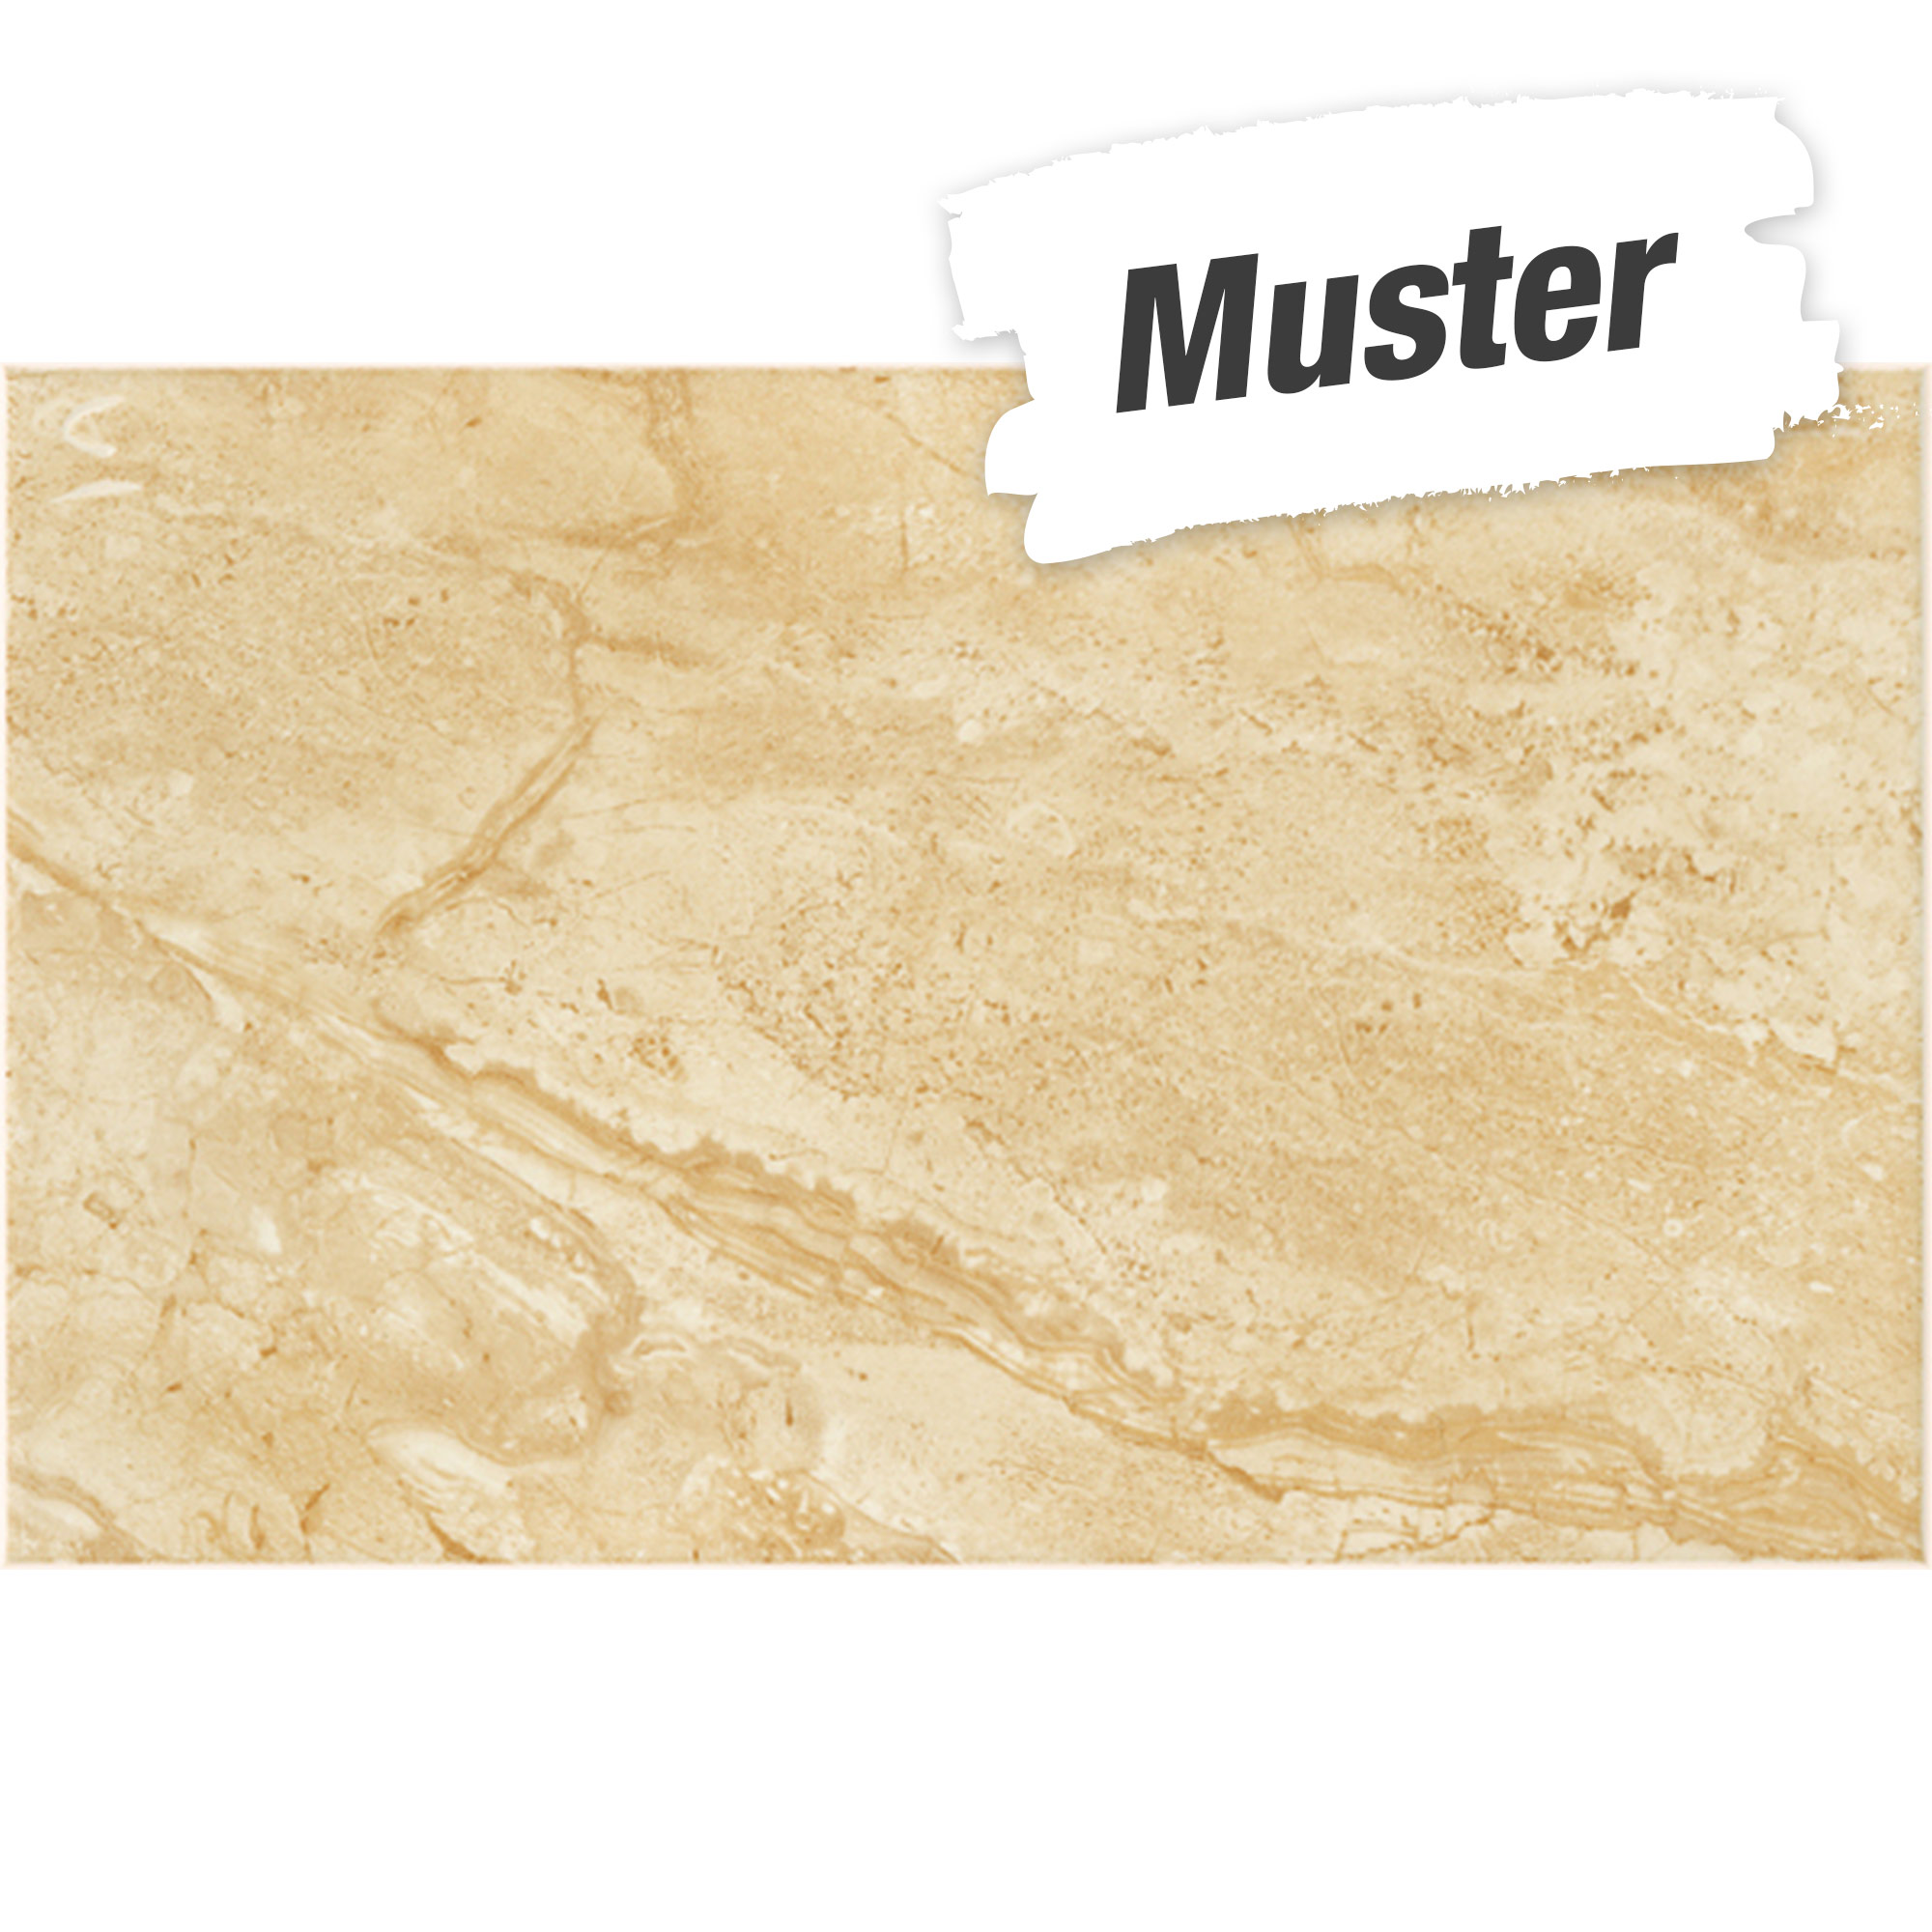 Muster zur Wandfliese 'Agia' Steingut beige 25 x 35 cm + product picture